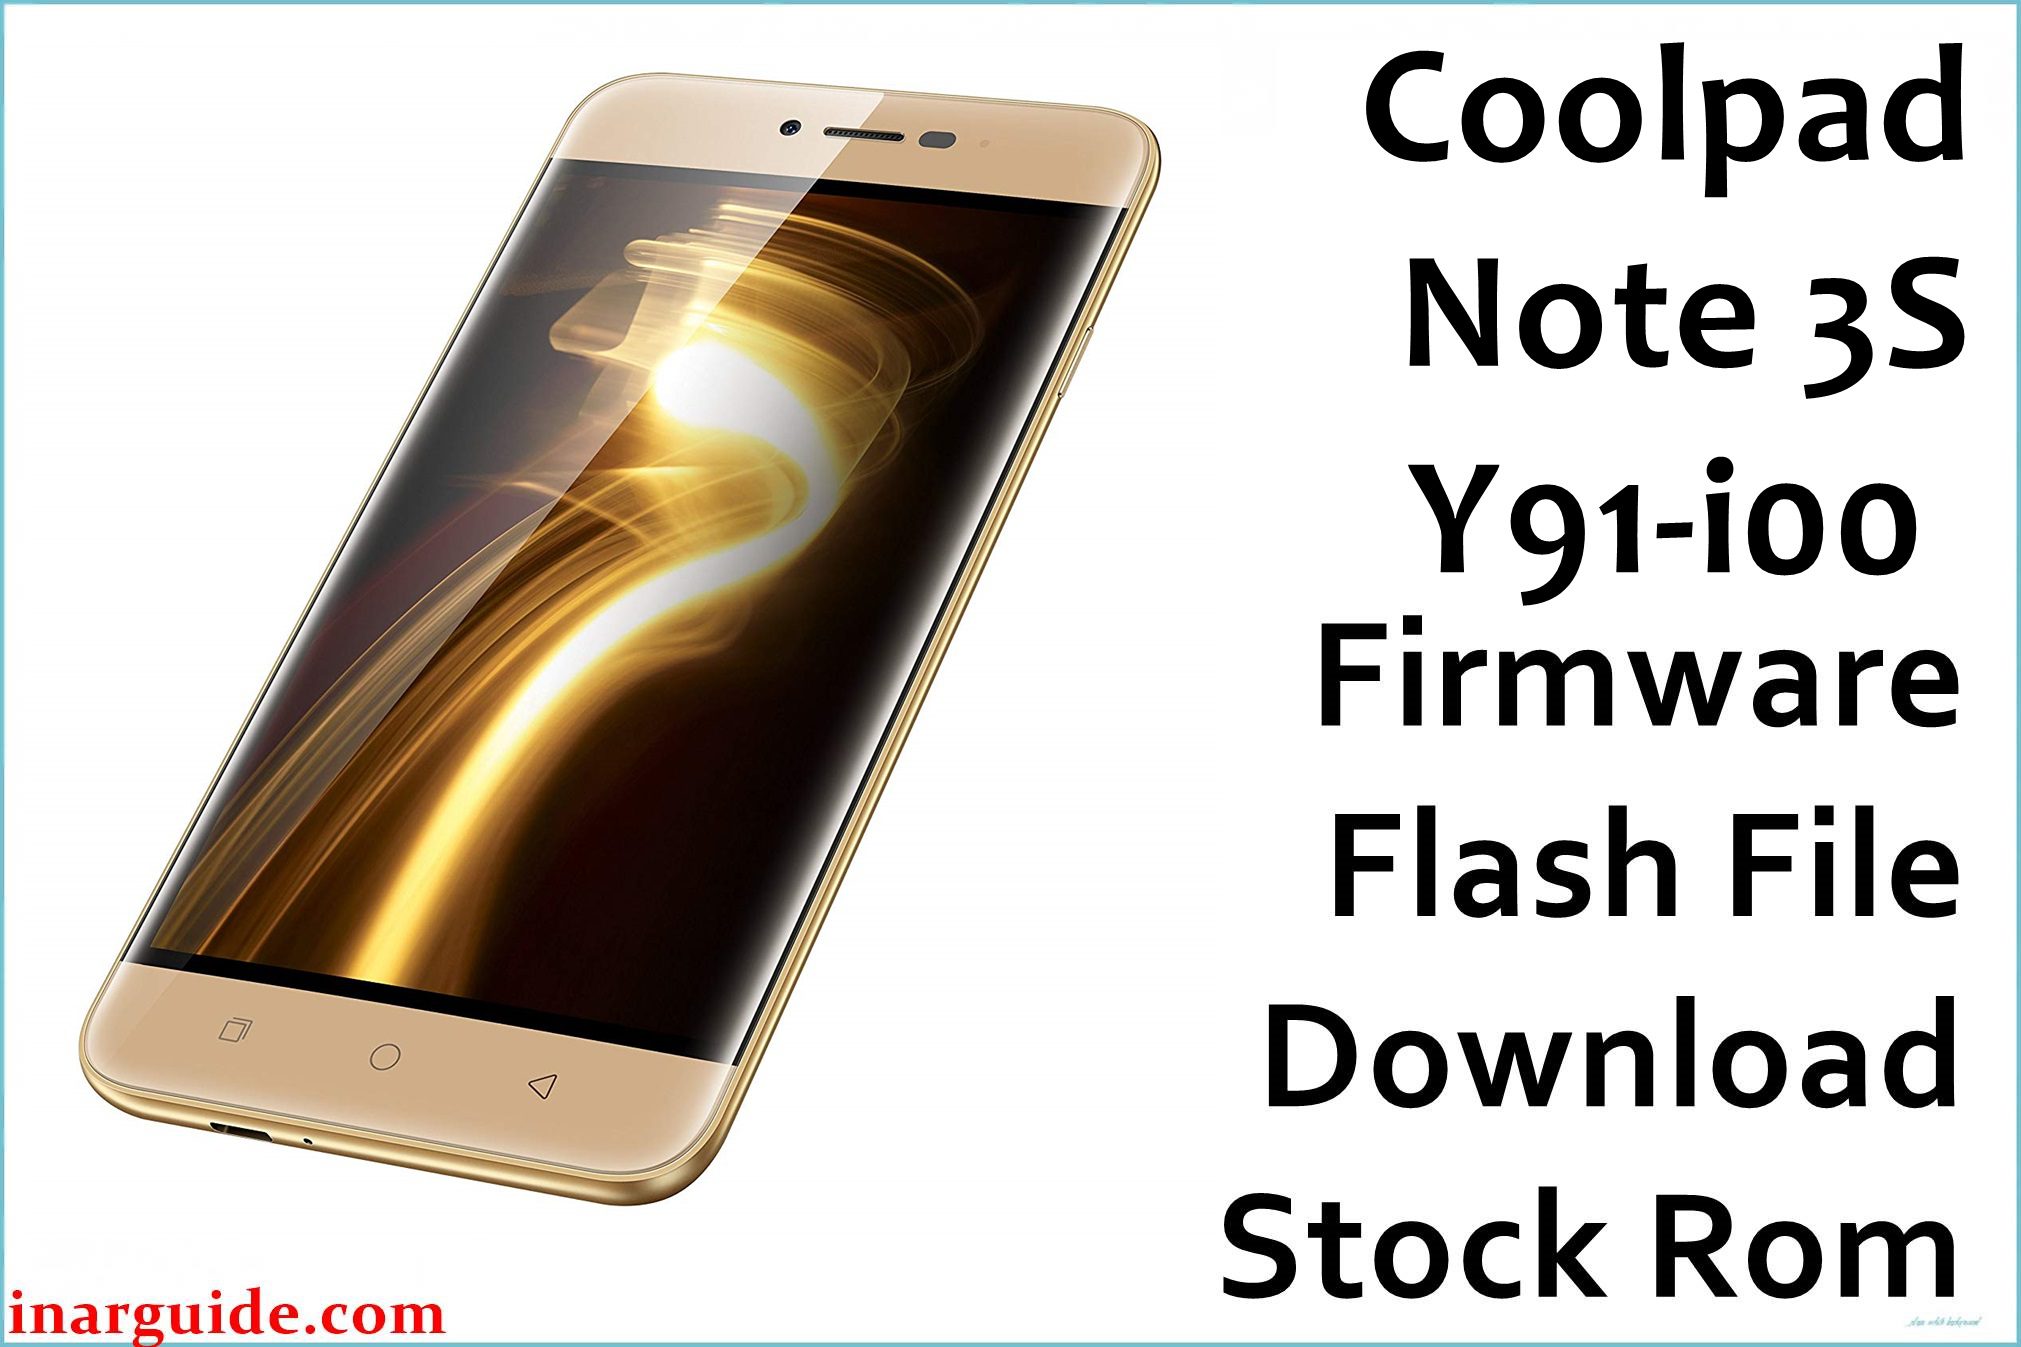 Coolpad Note 3S Y91 i00